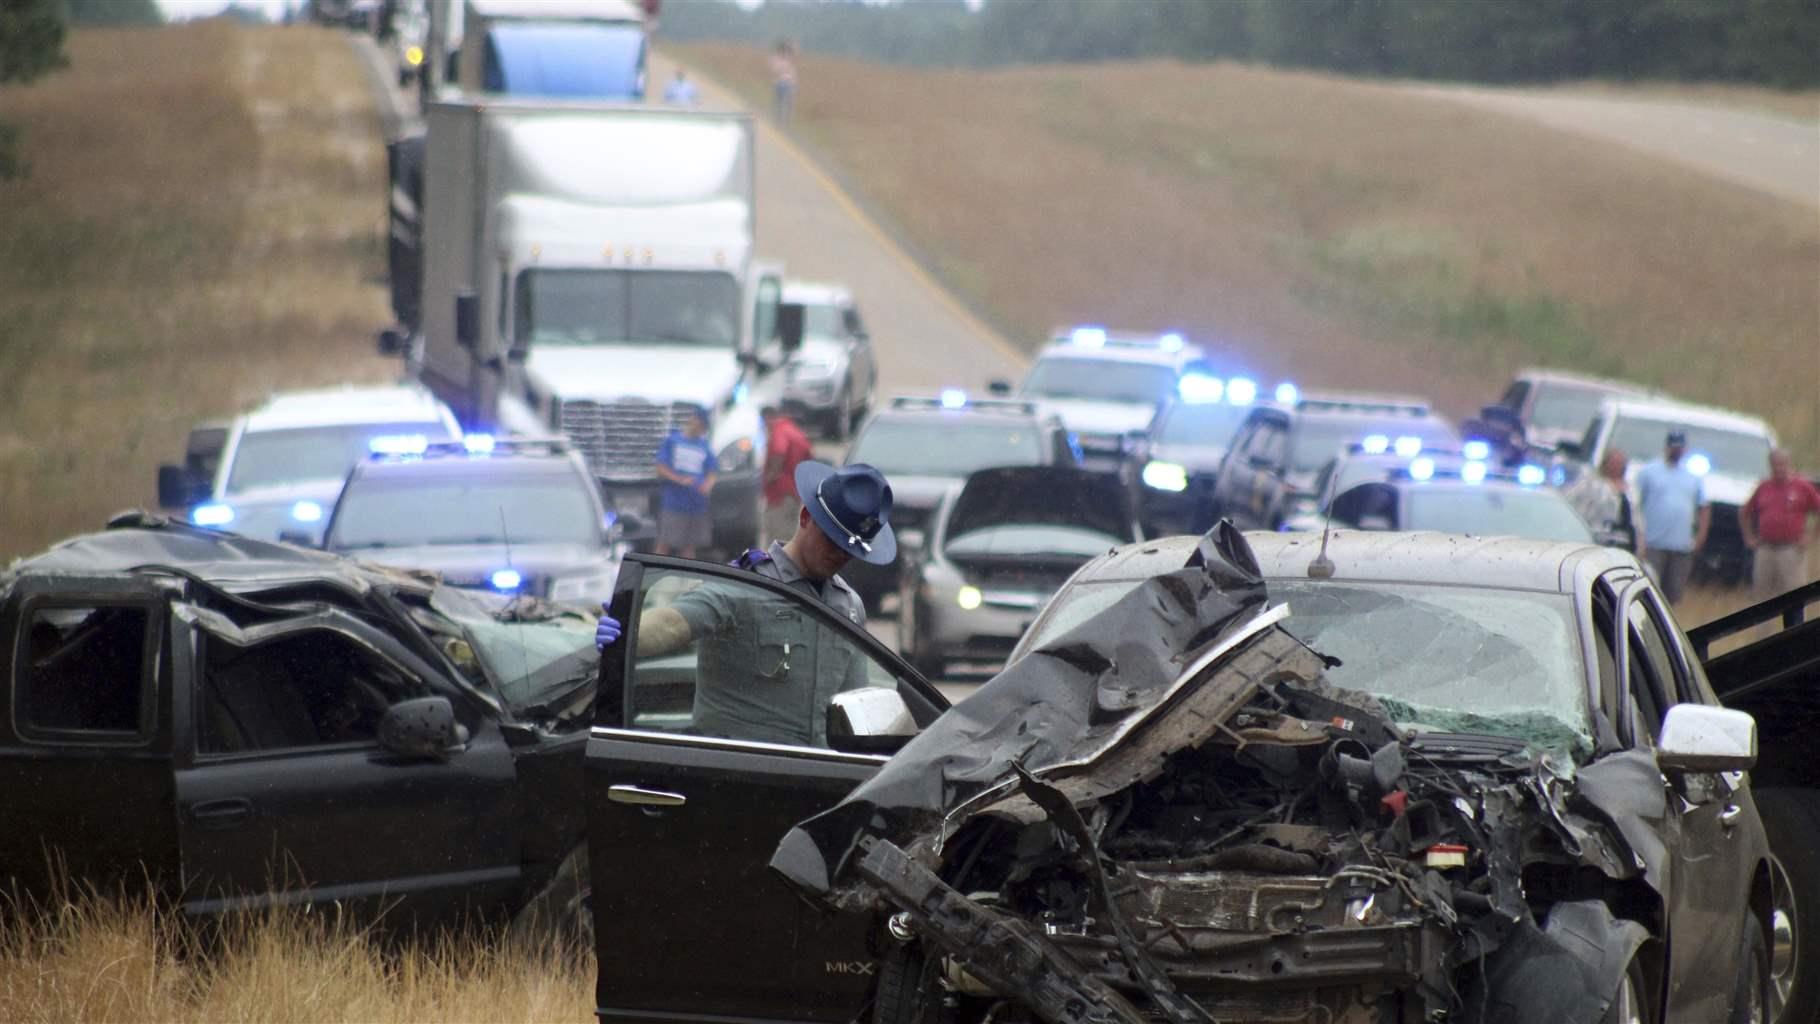 A Mississippi Highway Patrol state trooper investigates a wreck on U.S. Highway 45 south of Scooba in Kemper County, Miss., Wednesday, June 5, 2019. 